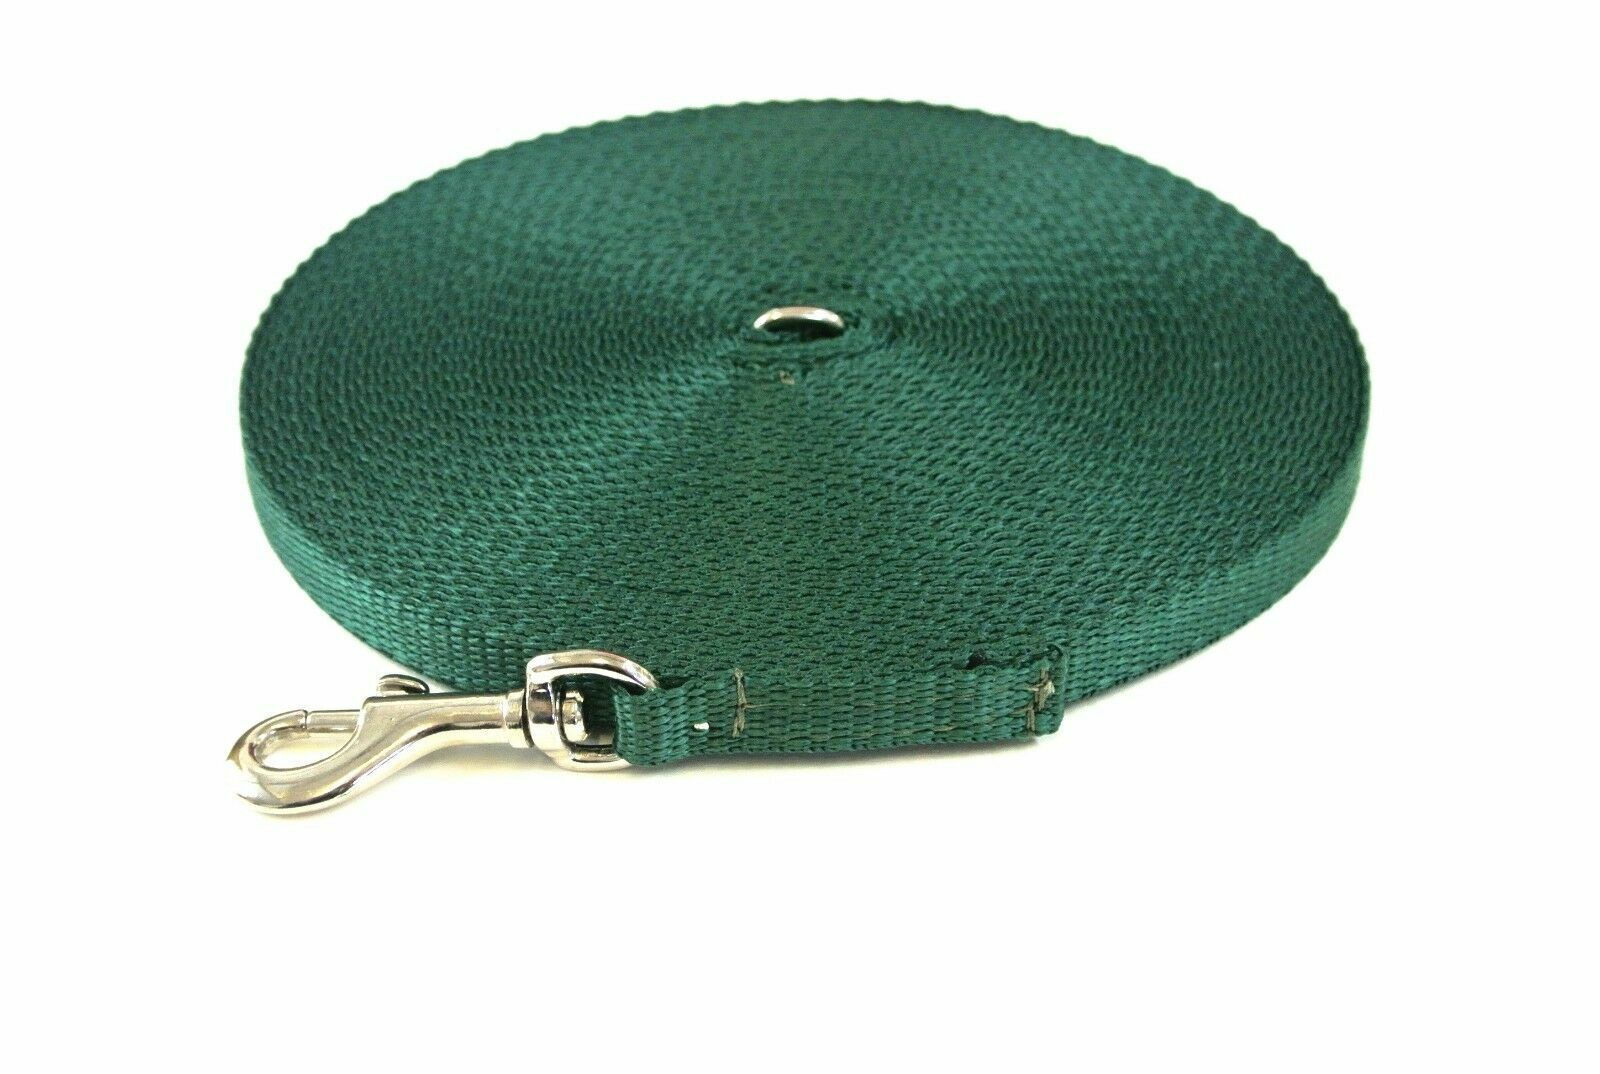 15m Green Pet Dog Puppy Training Lead Leash Collar Lead Harness Strong Long Line Rope